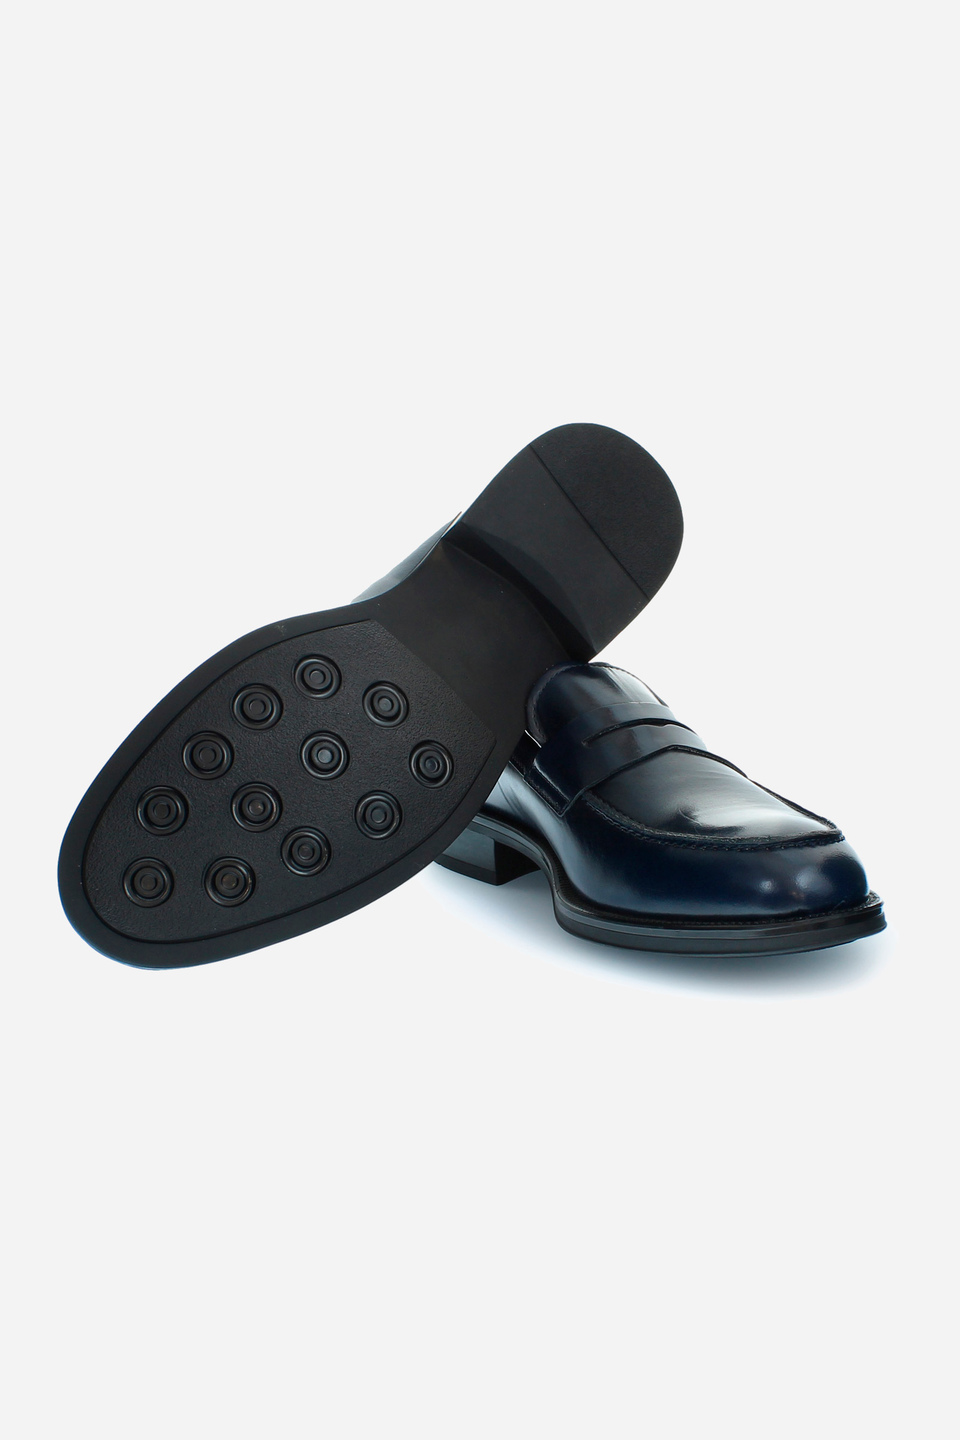 Men's college loafers in leather | La Martina - Official Online Shop